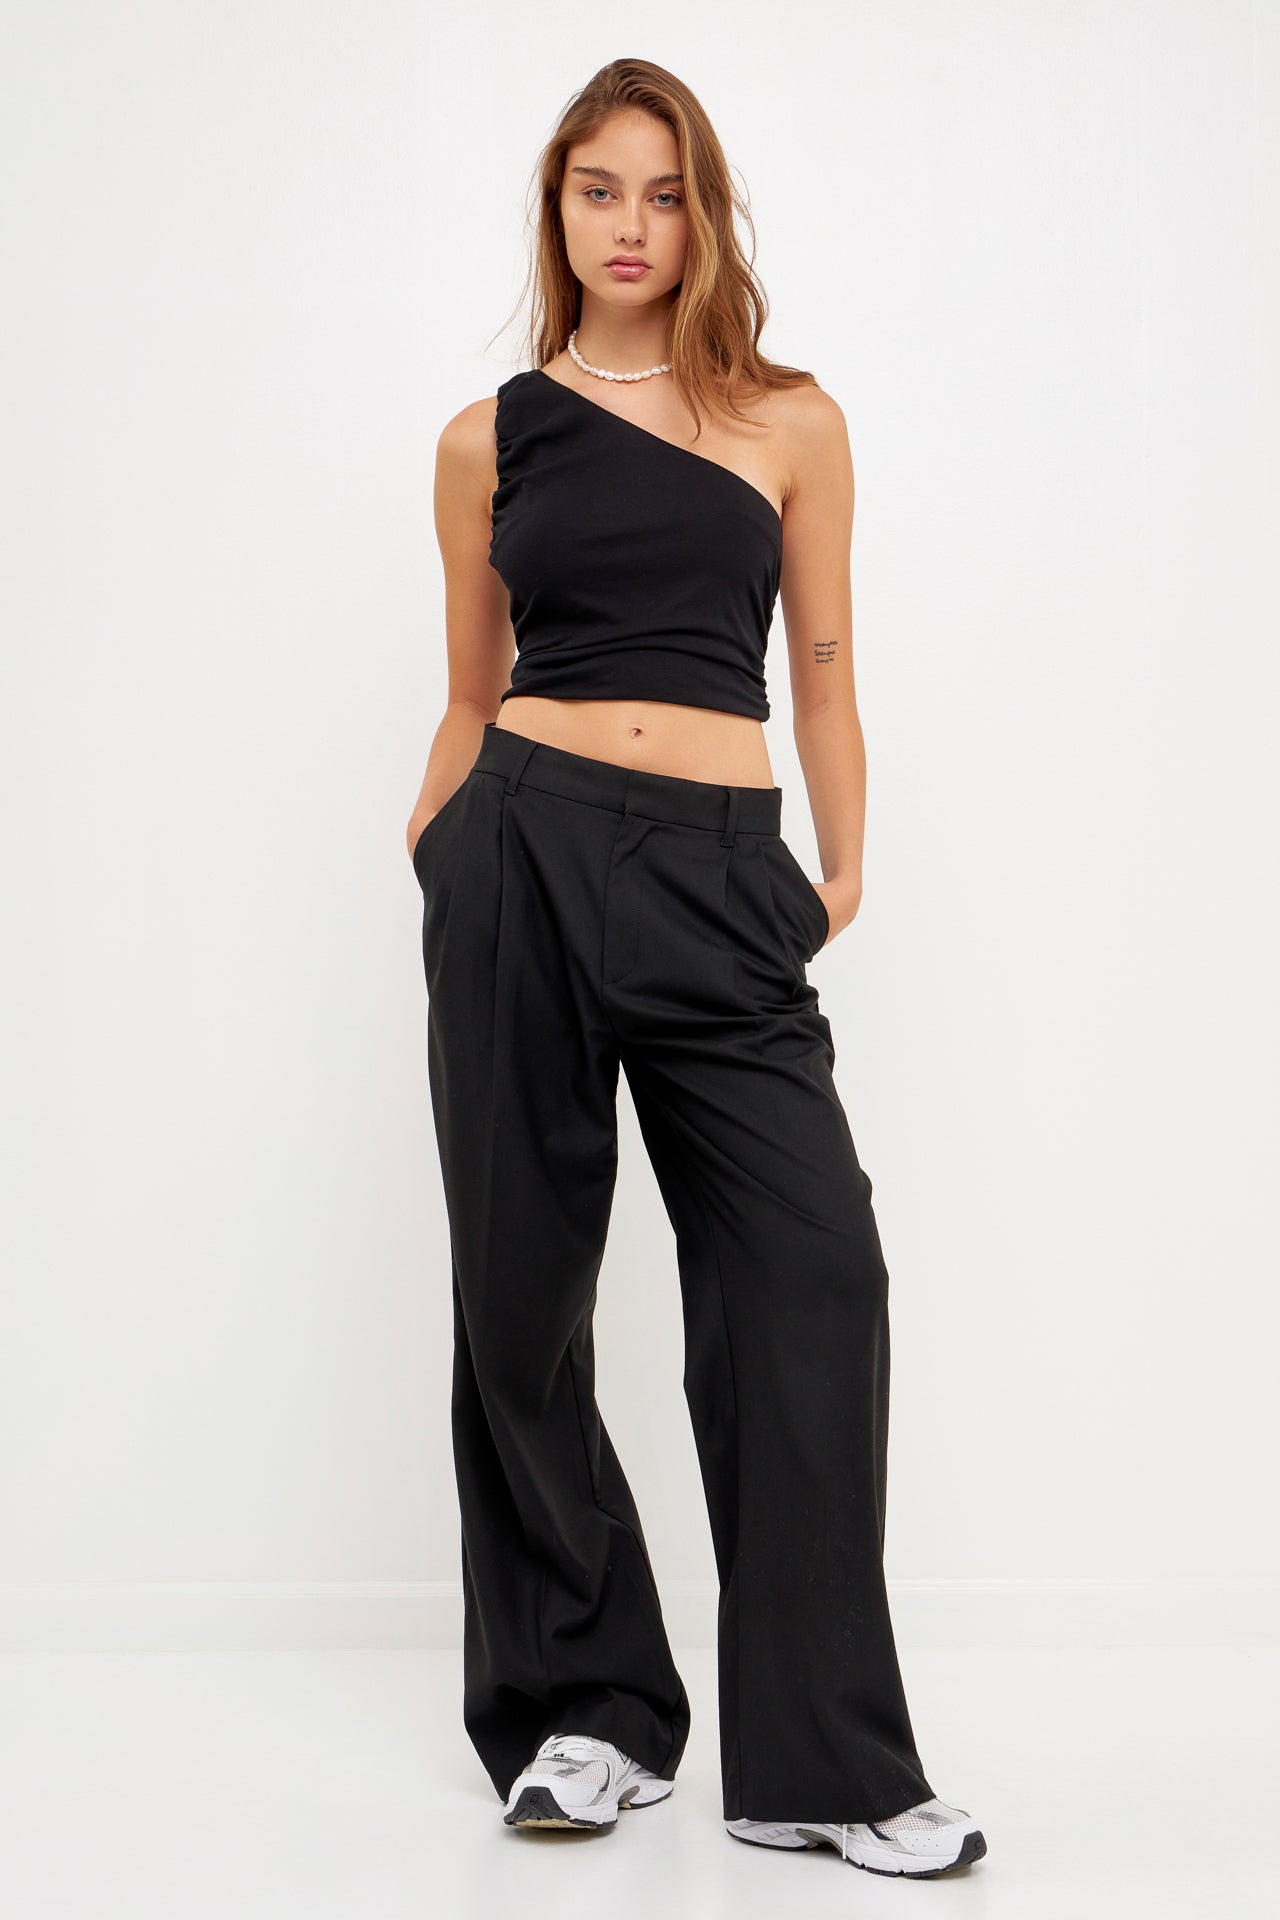 GREY LAB - Ruched One Shoulder Crop Top - TOPS available at Objectrare